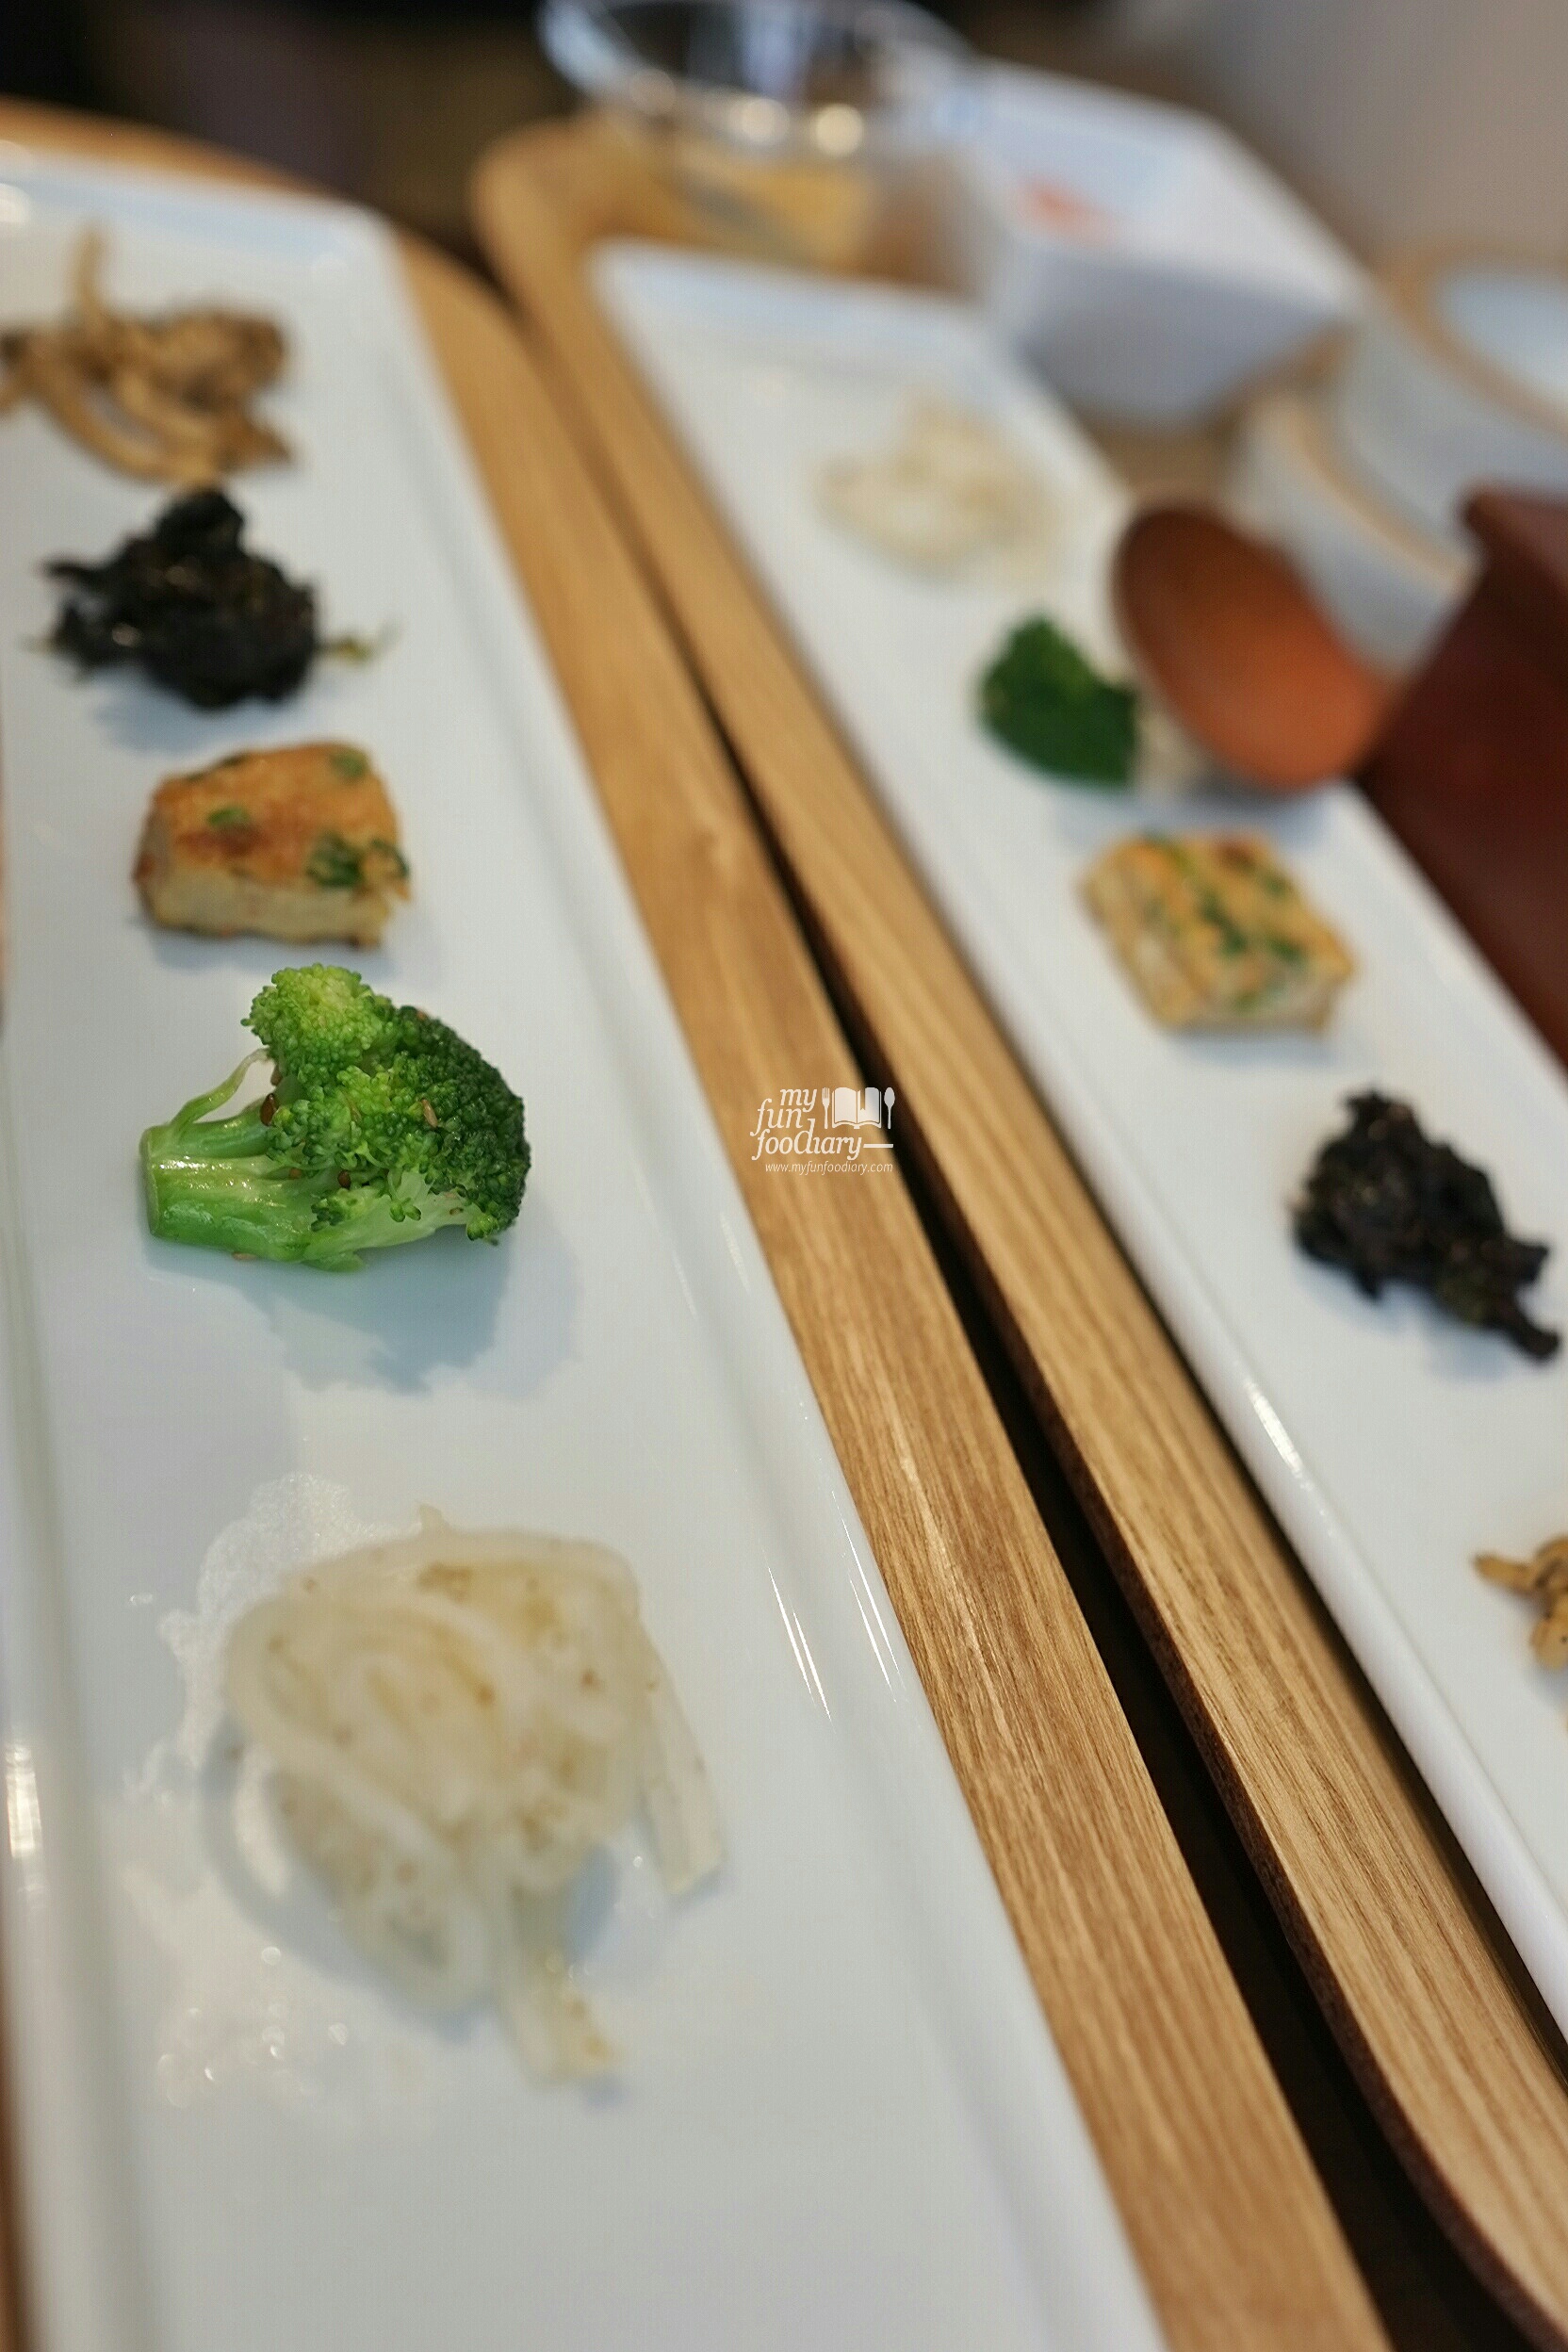 Side Dishes at OSURI Restaurant in Tokyo Japan by Myfunfoodiary